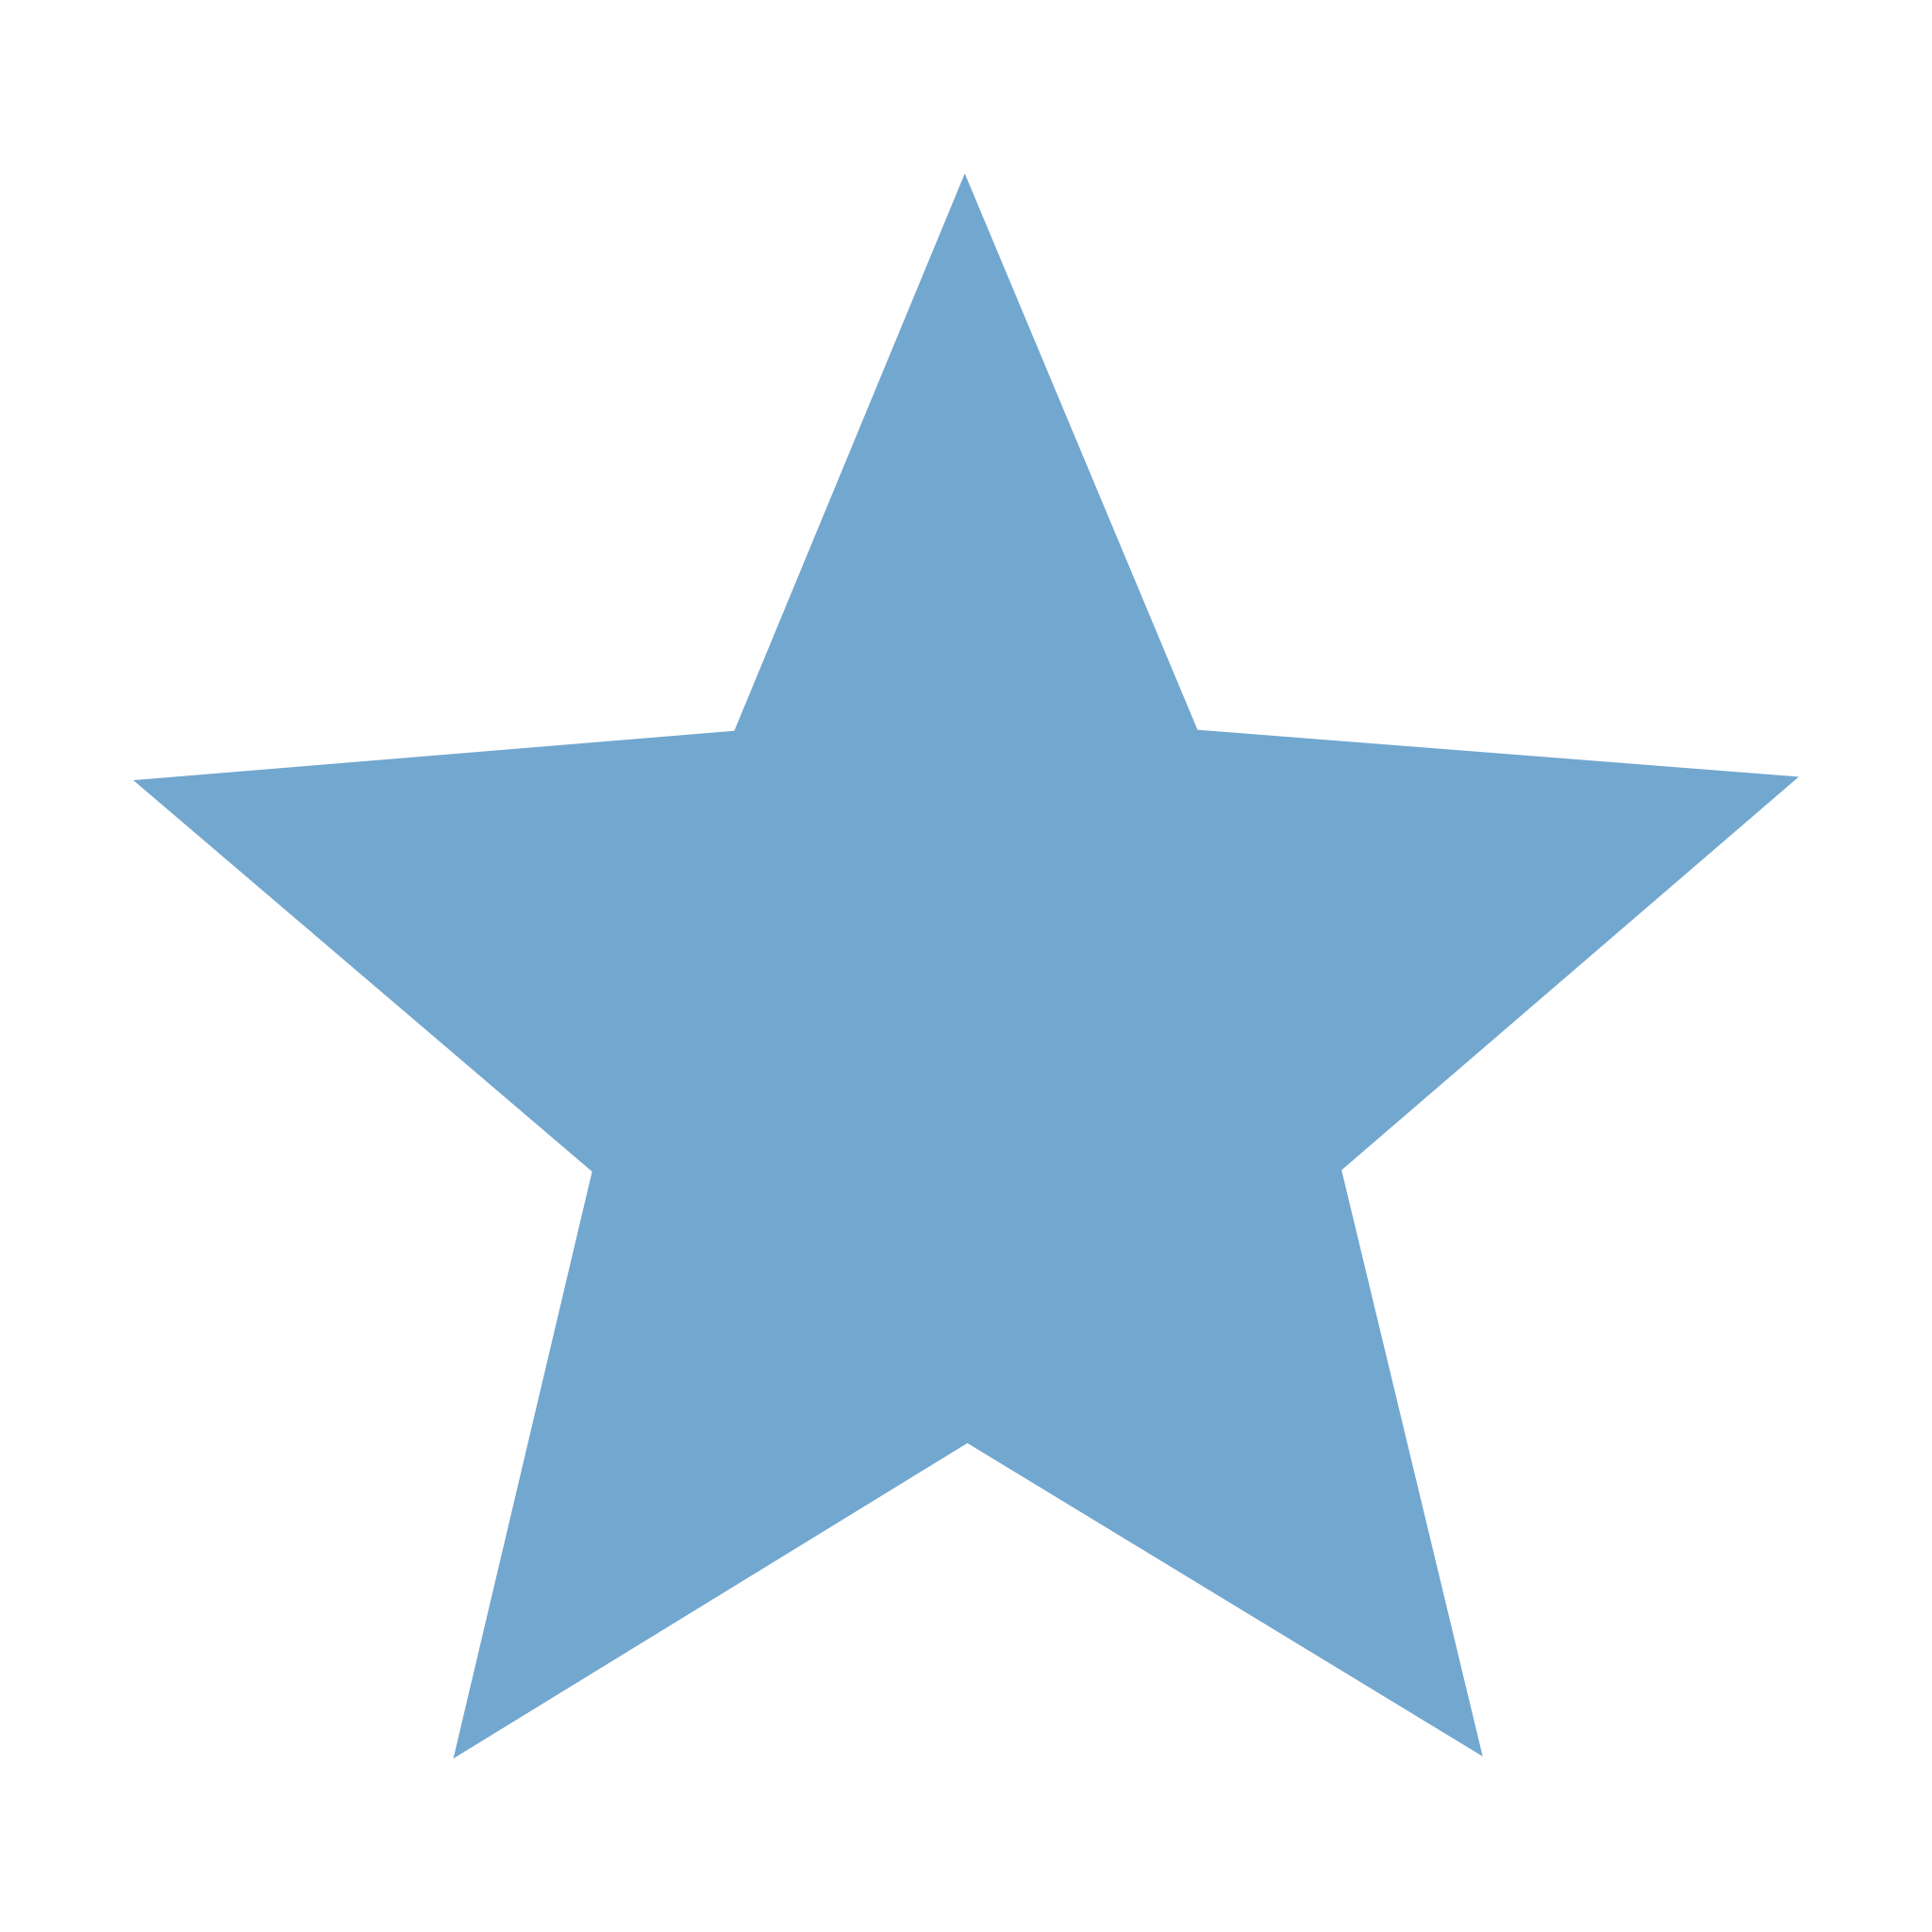 File:Star-.svg - Wikimedia Commons